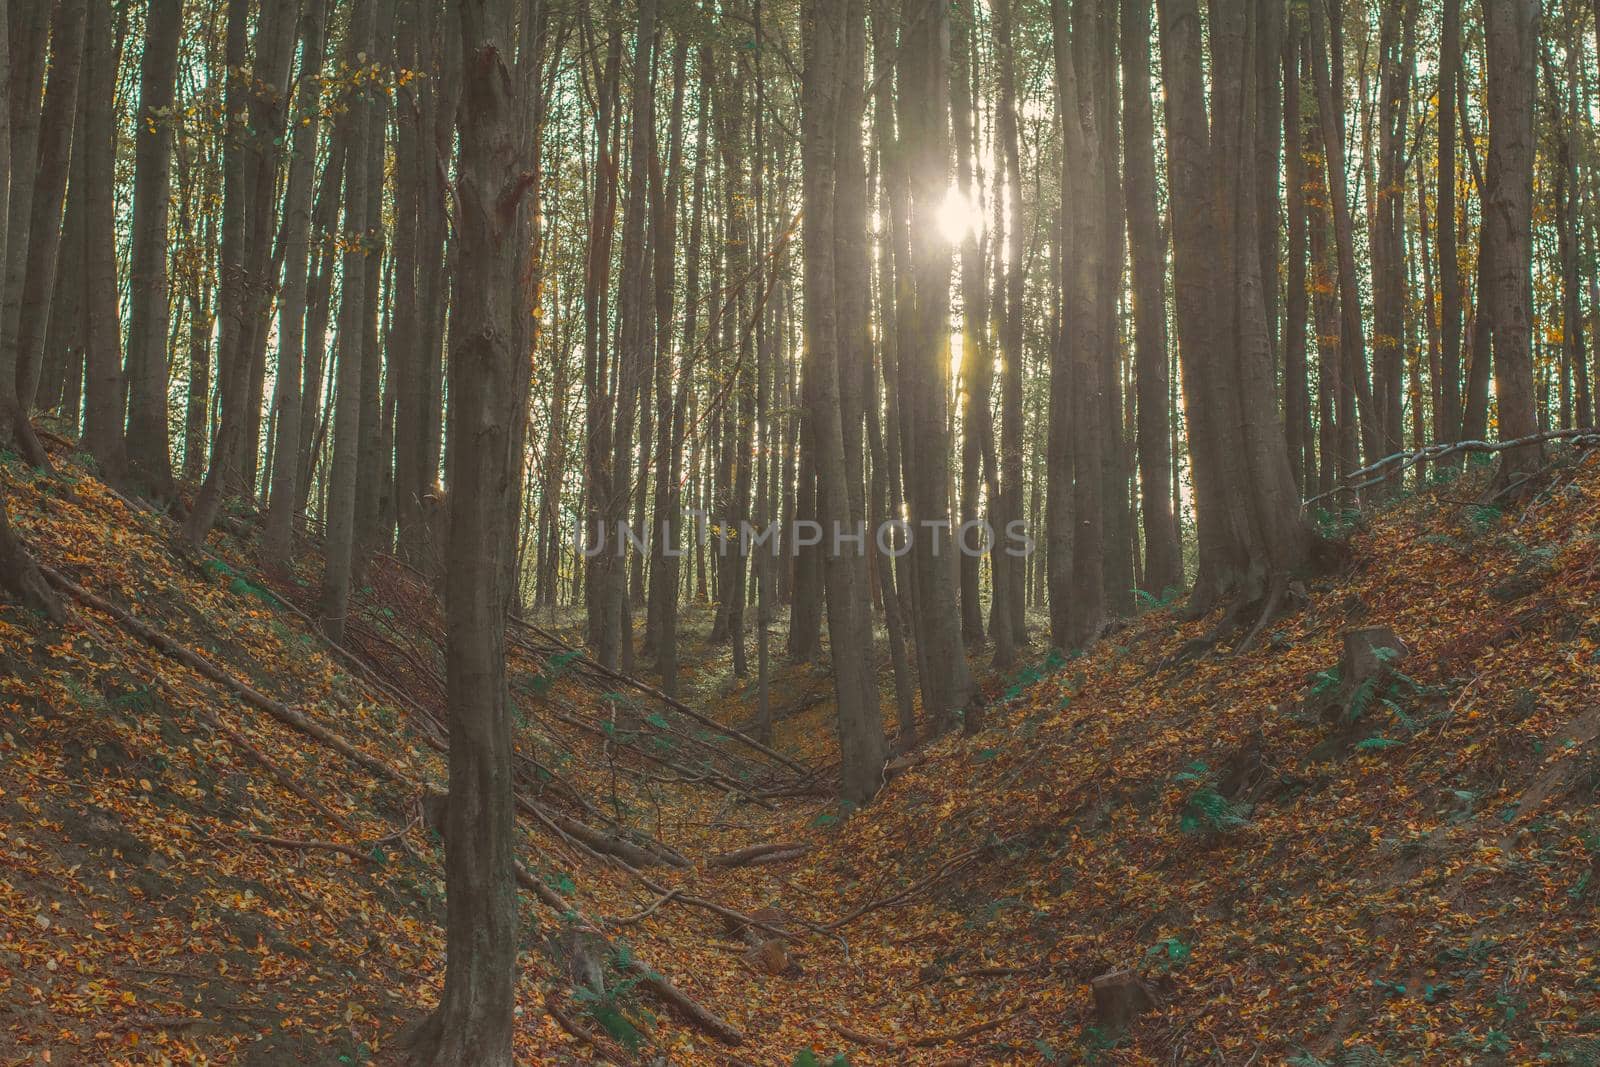 Autumn Forest Scenery With Illuminated Sun Lights by banate